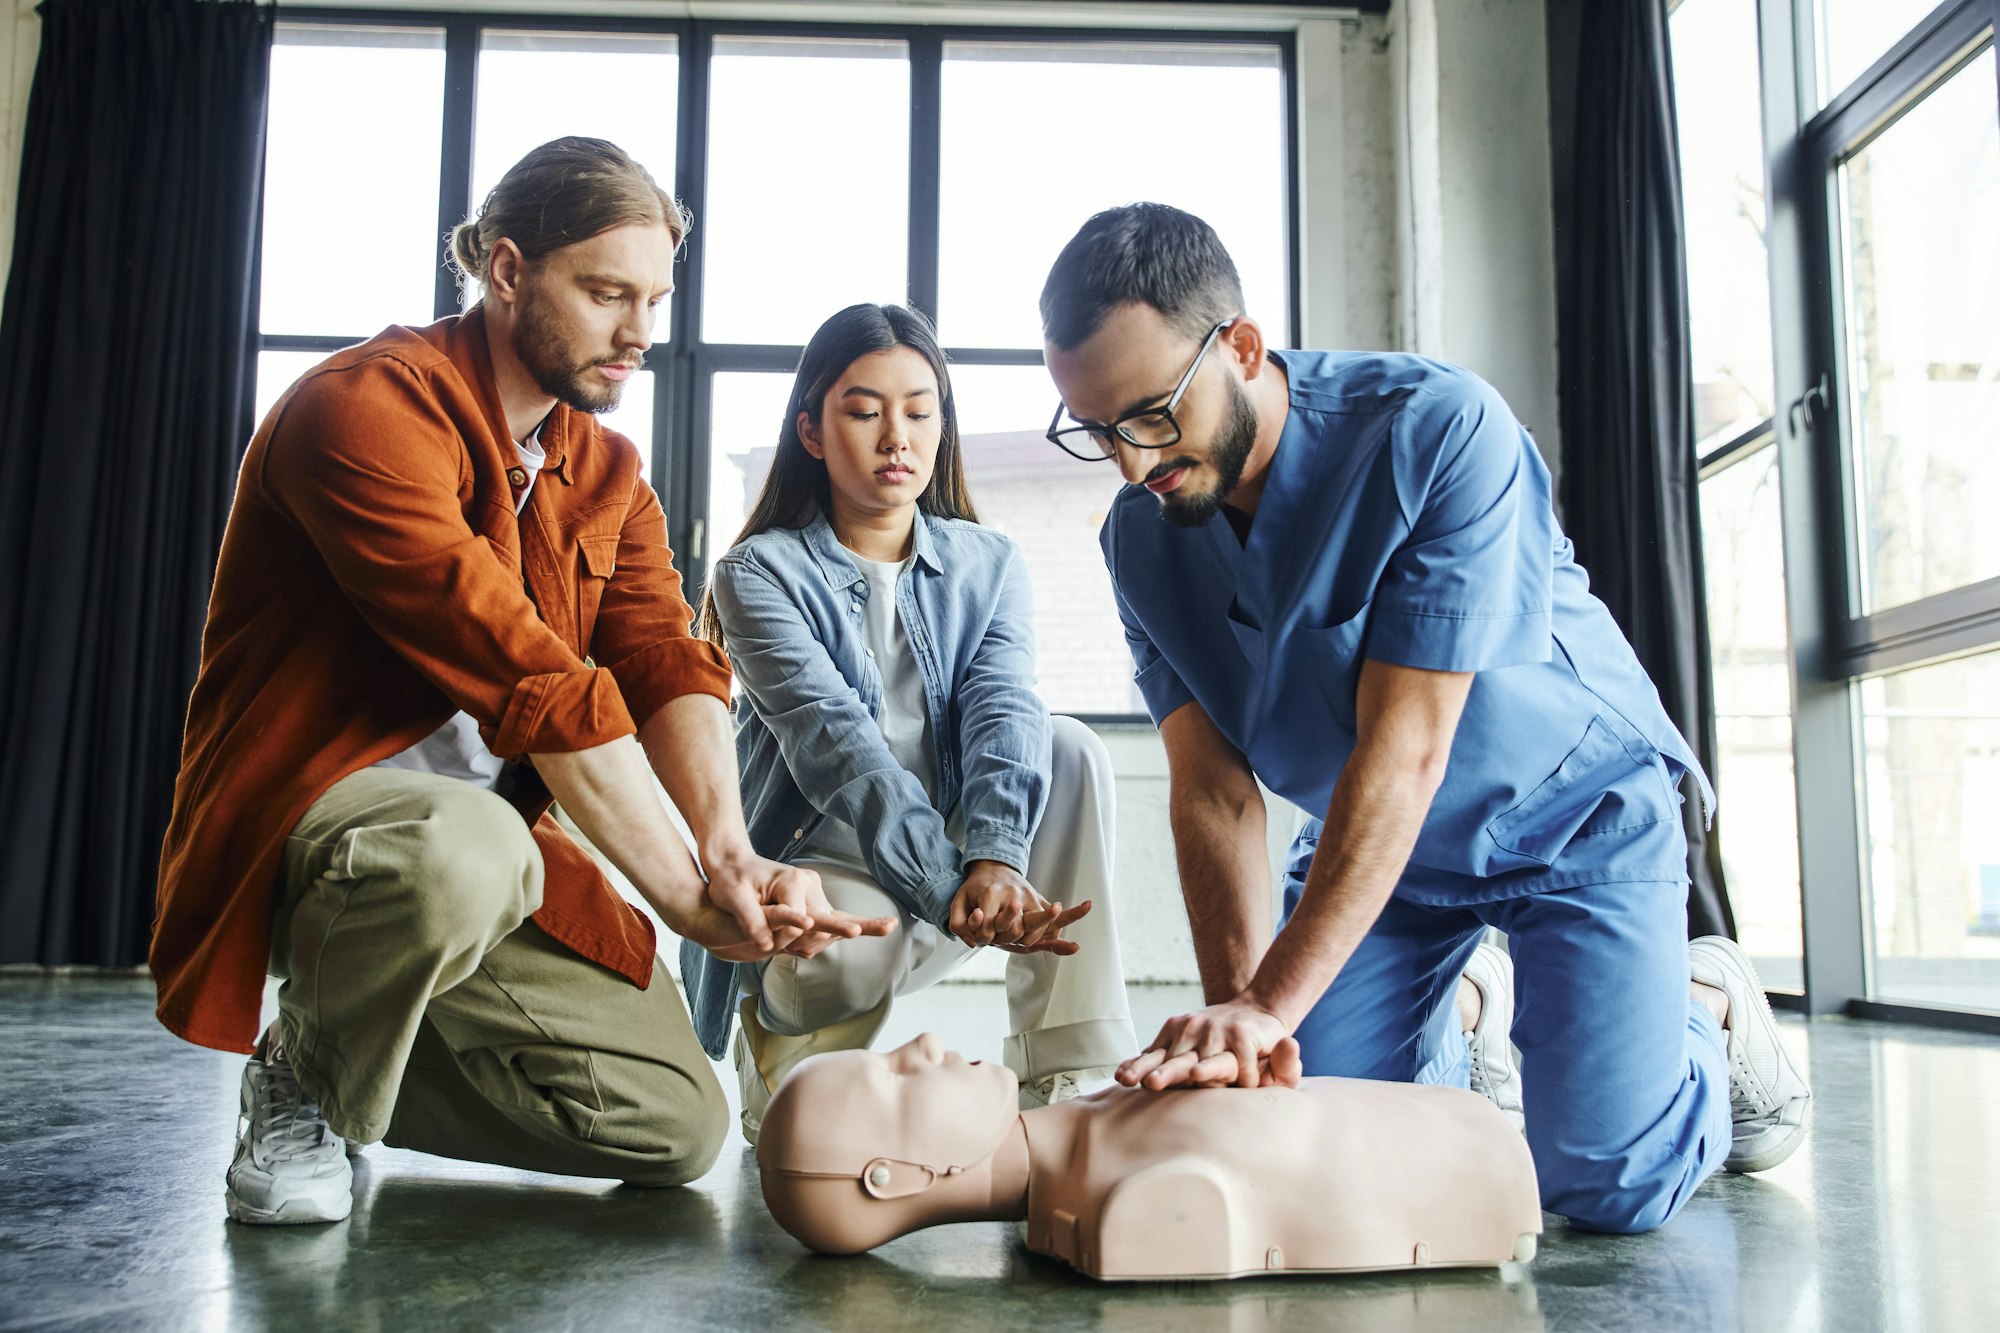 professional paramedic in eyeglasses and uniform showing chest compressions on CPR manikin near